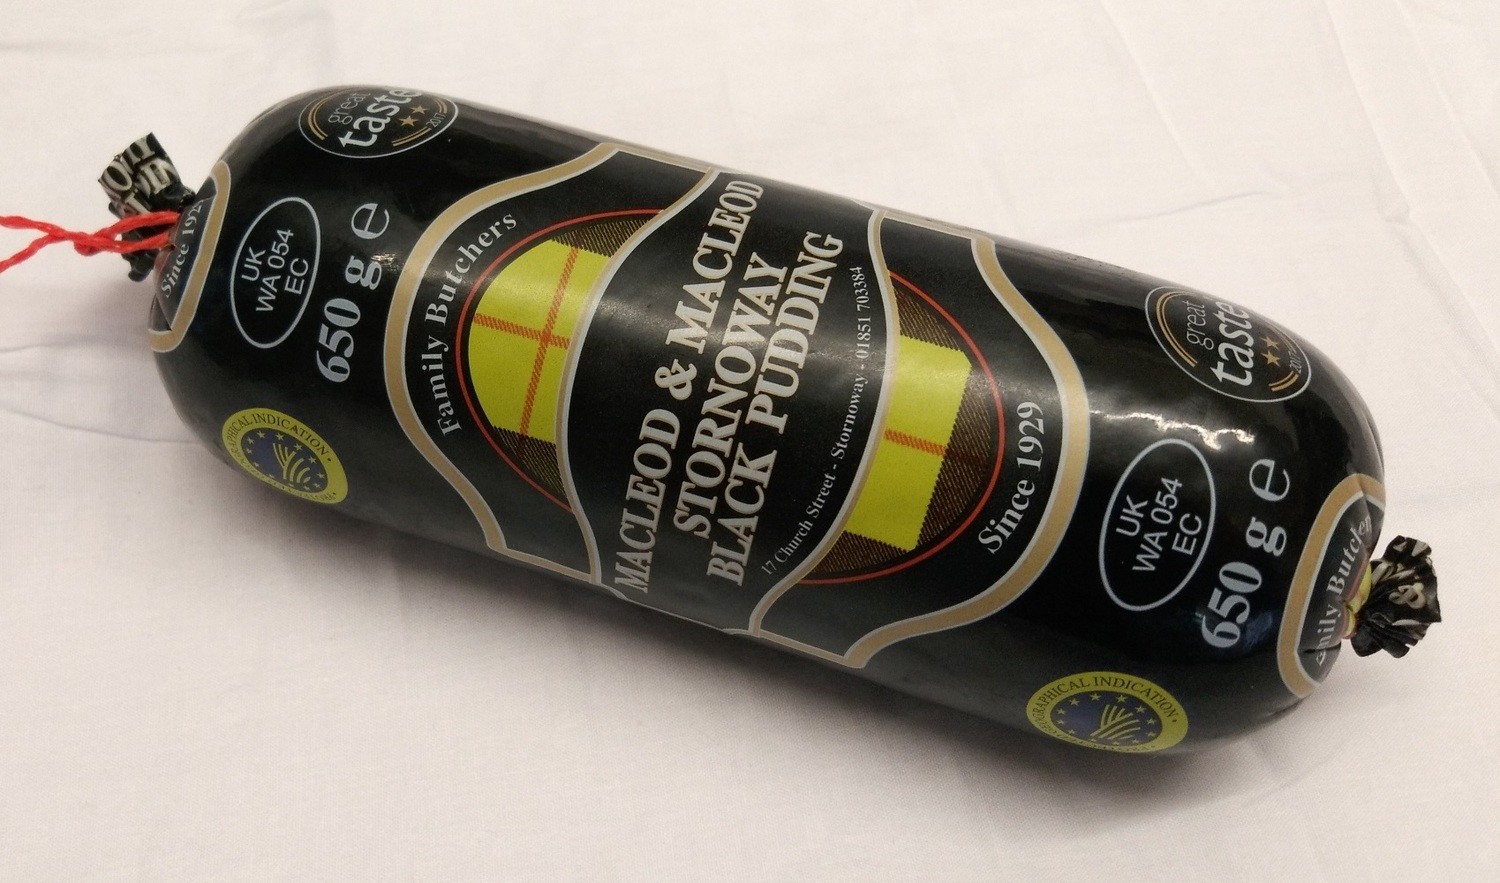 Original Stornoway Black Pudding 650g  BEST BEFORE DATE 30/06/2022 CLEARANCE SALE